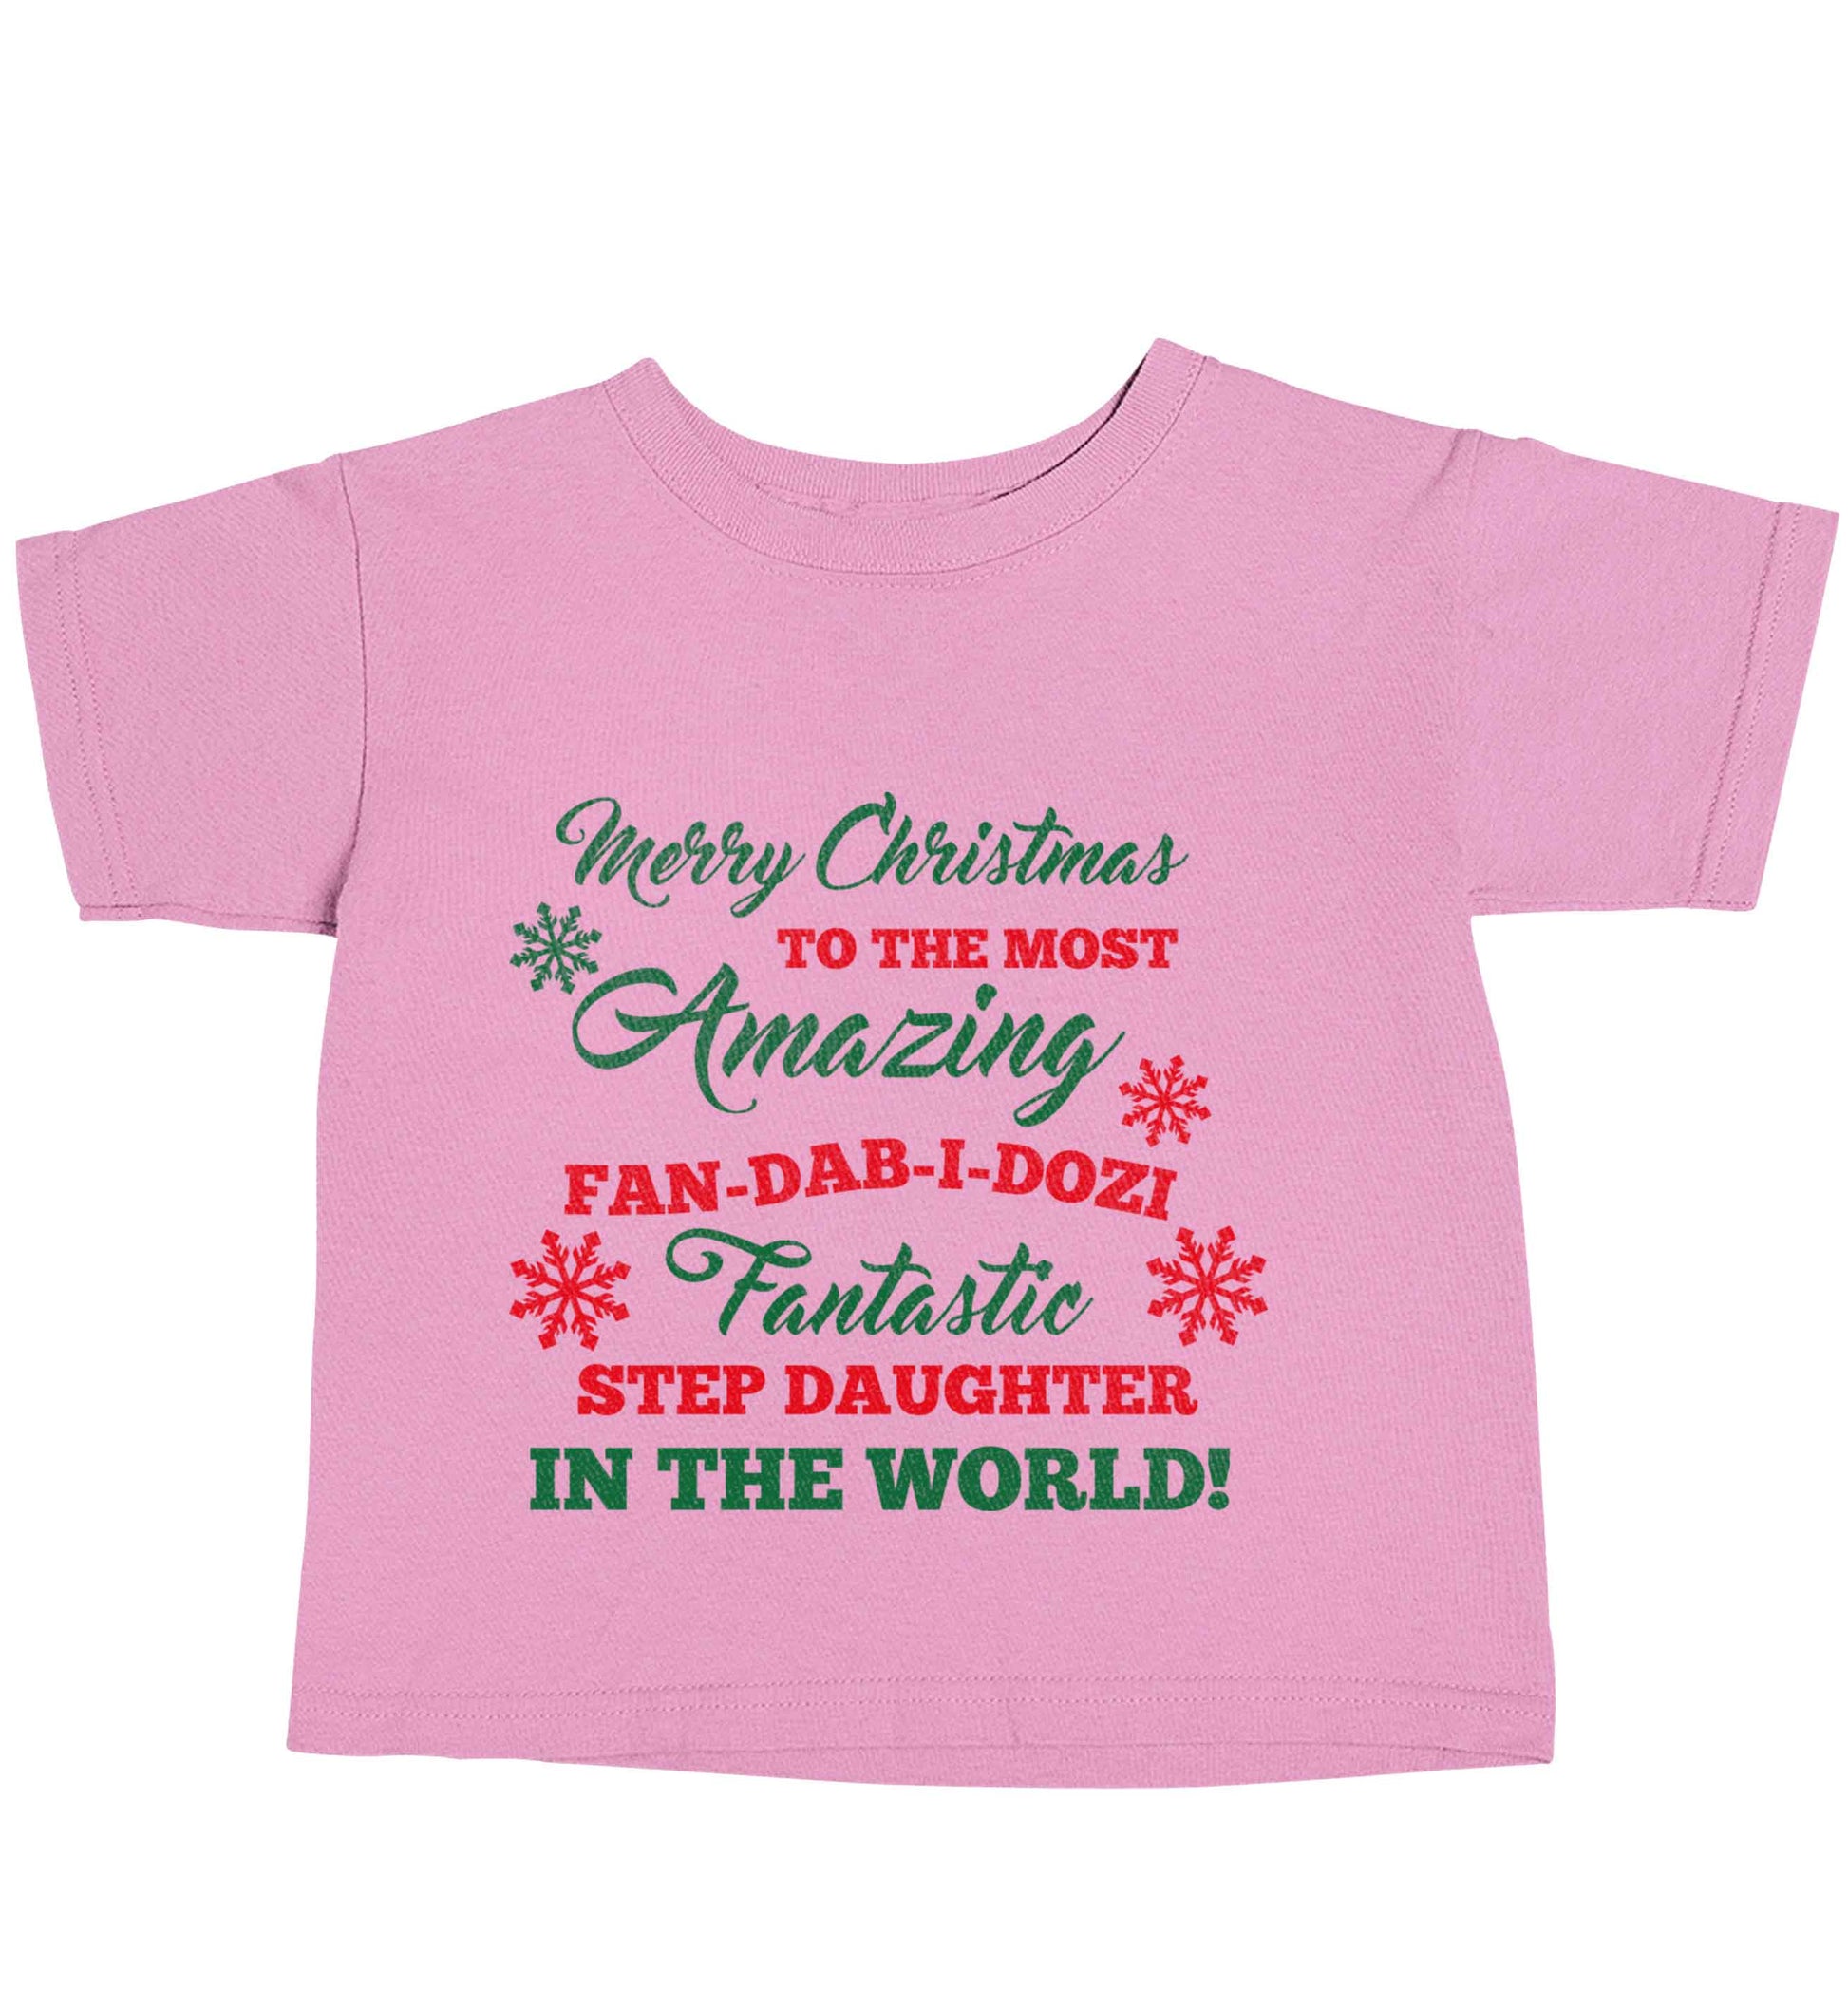 Merry Christmas to the most amazing fan-dab-i-dozi fantasic Step Daughter in the world light pink baby toddler Tshirt 2 Years